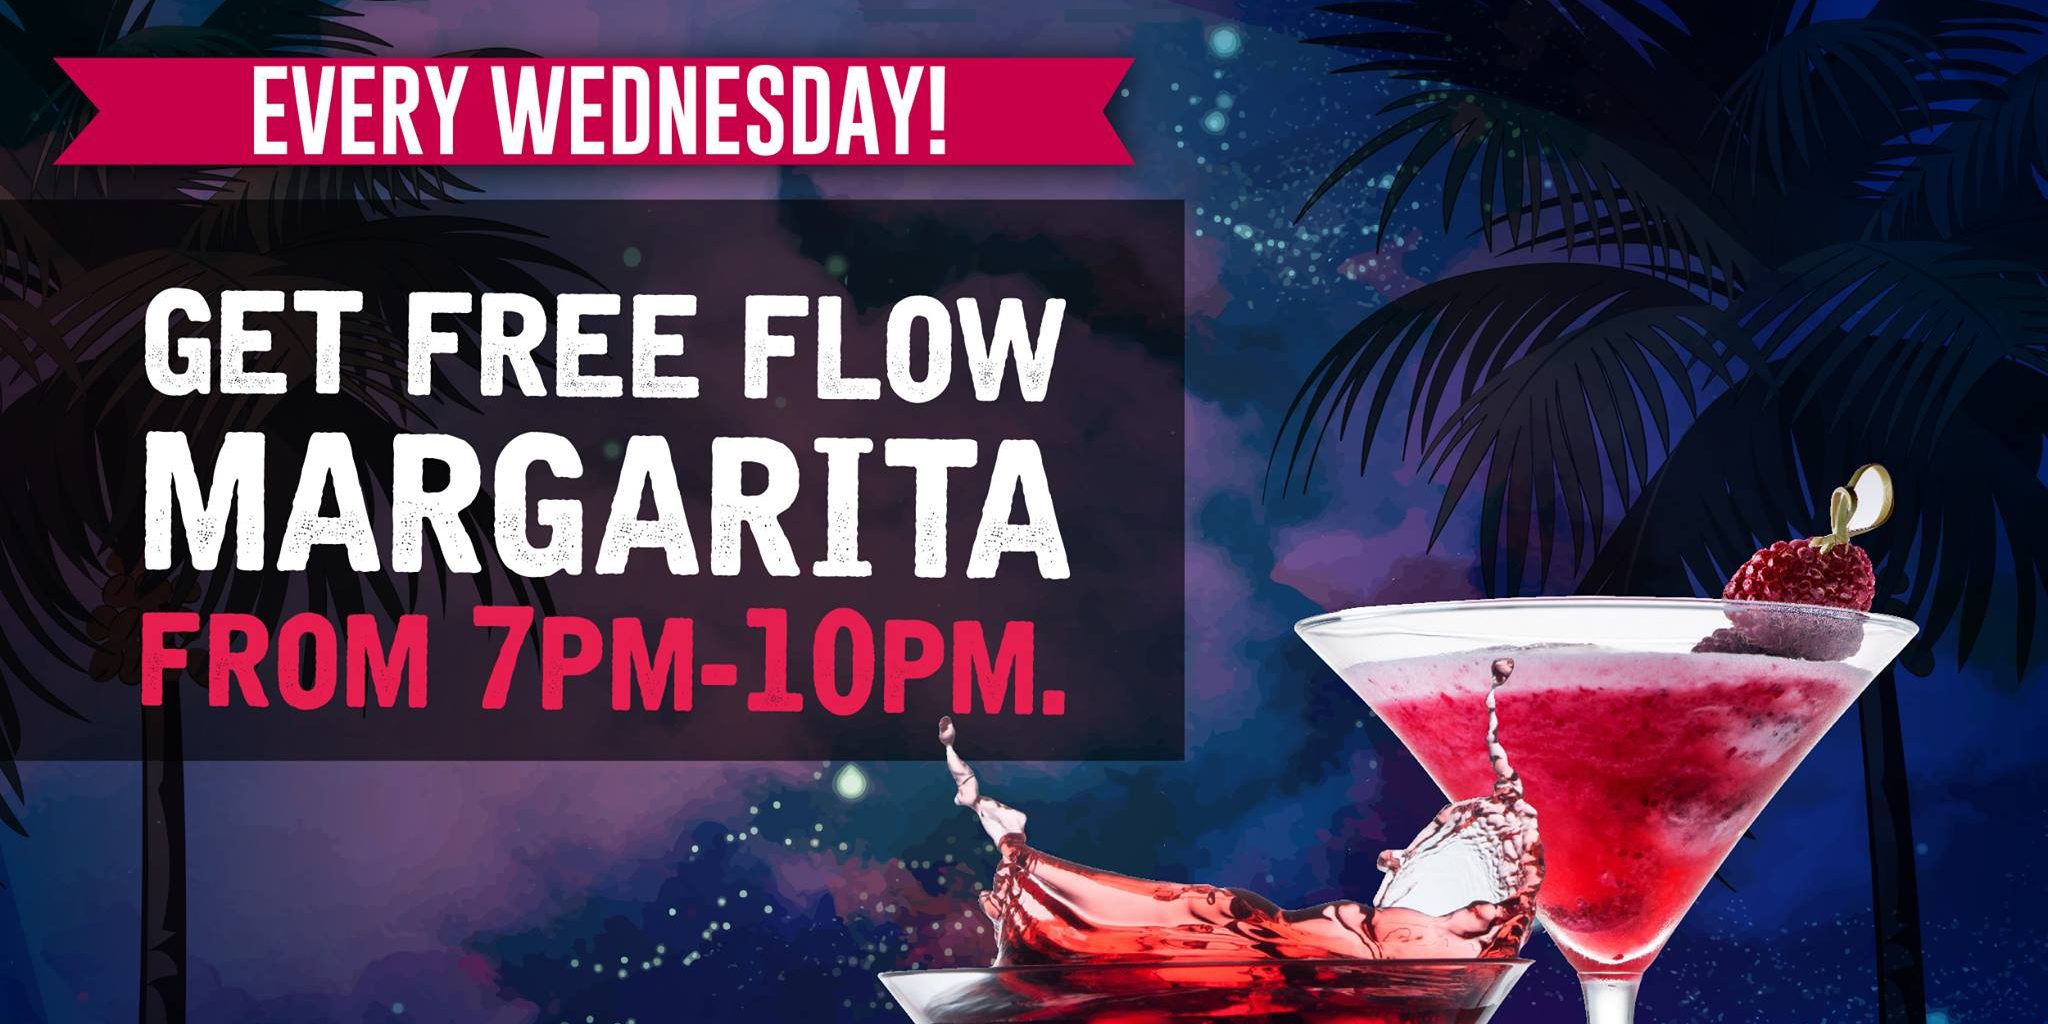 Don’t Tell Mama Singapore FREE Flow Margarita Wed Ladies Night Promotion ends 30 Apr 2017